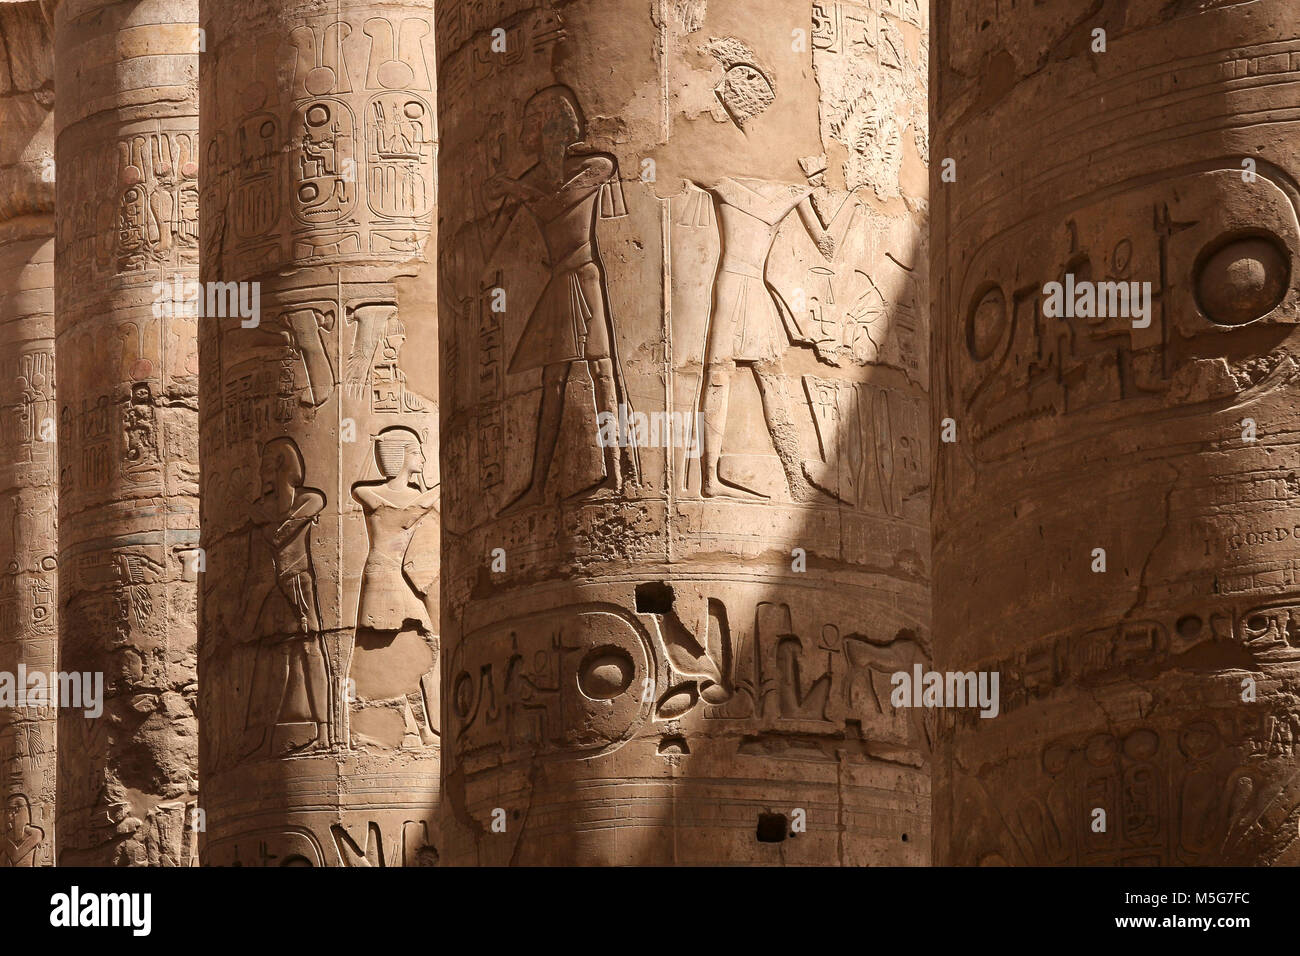 Reliefs on columns in Great Hypostyle Hall in Karnak Temple, Luxor, Egypt Stock Photo